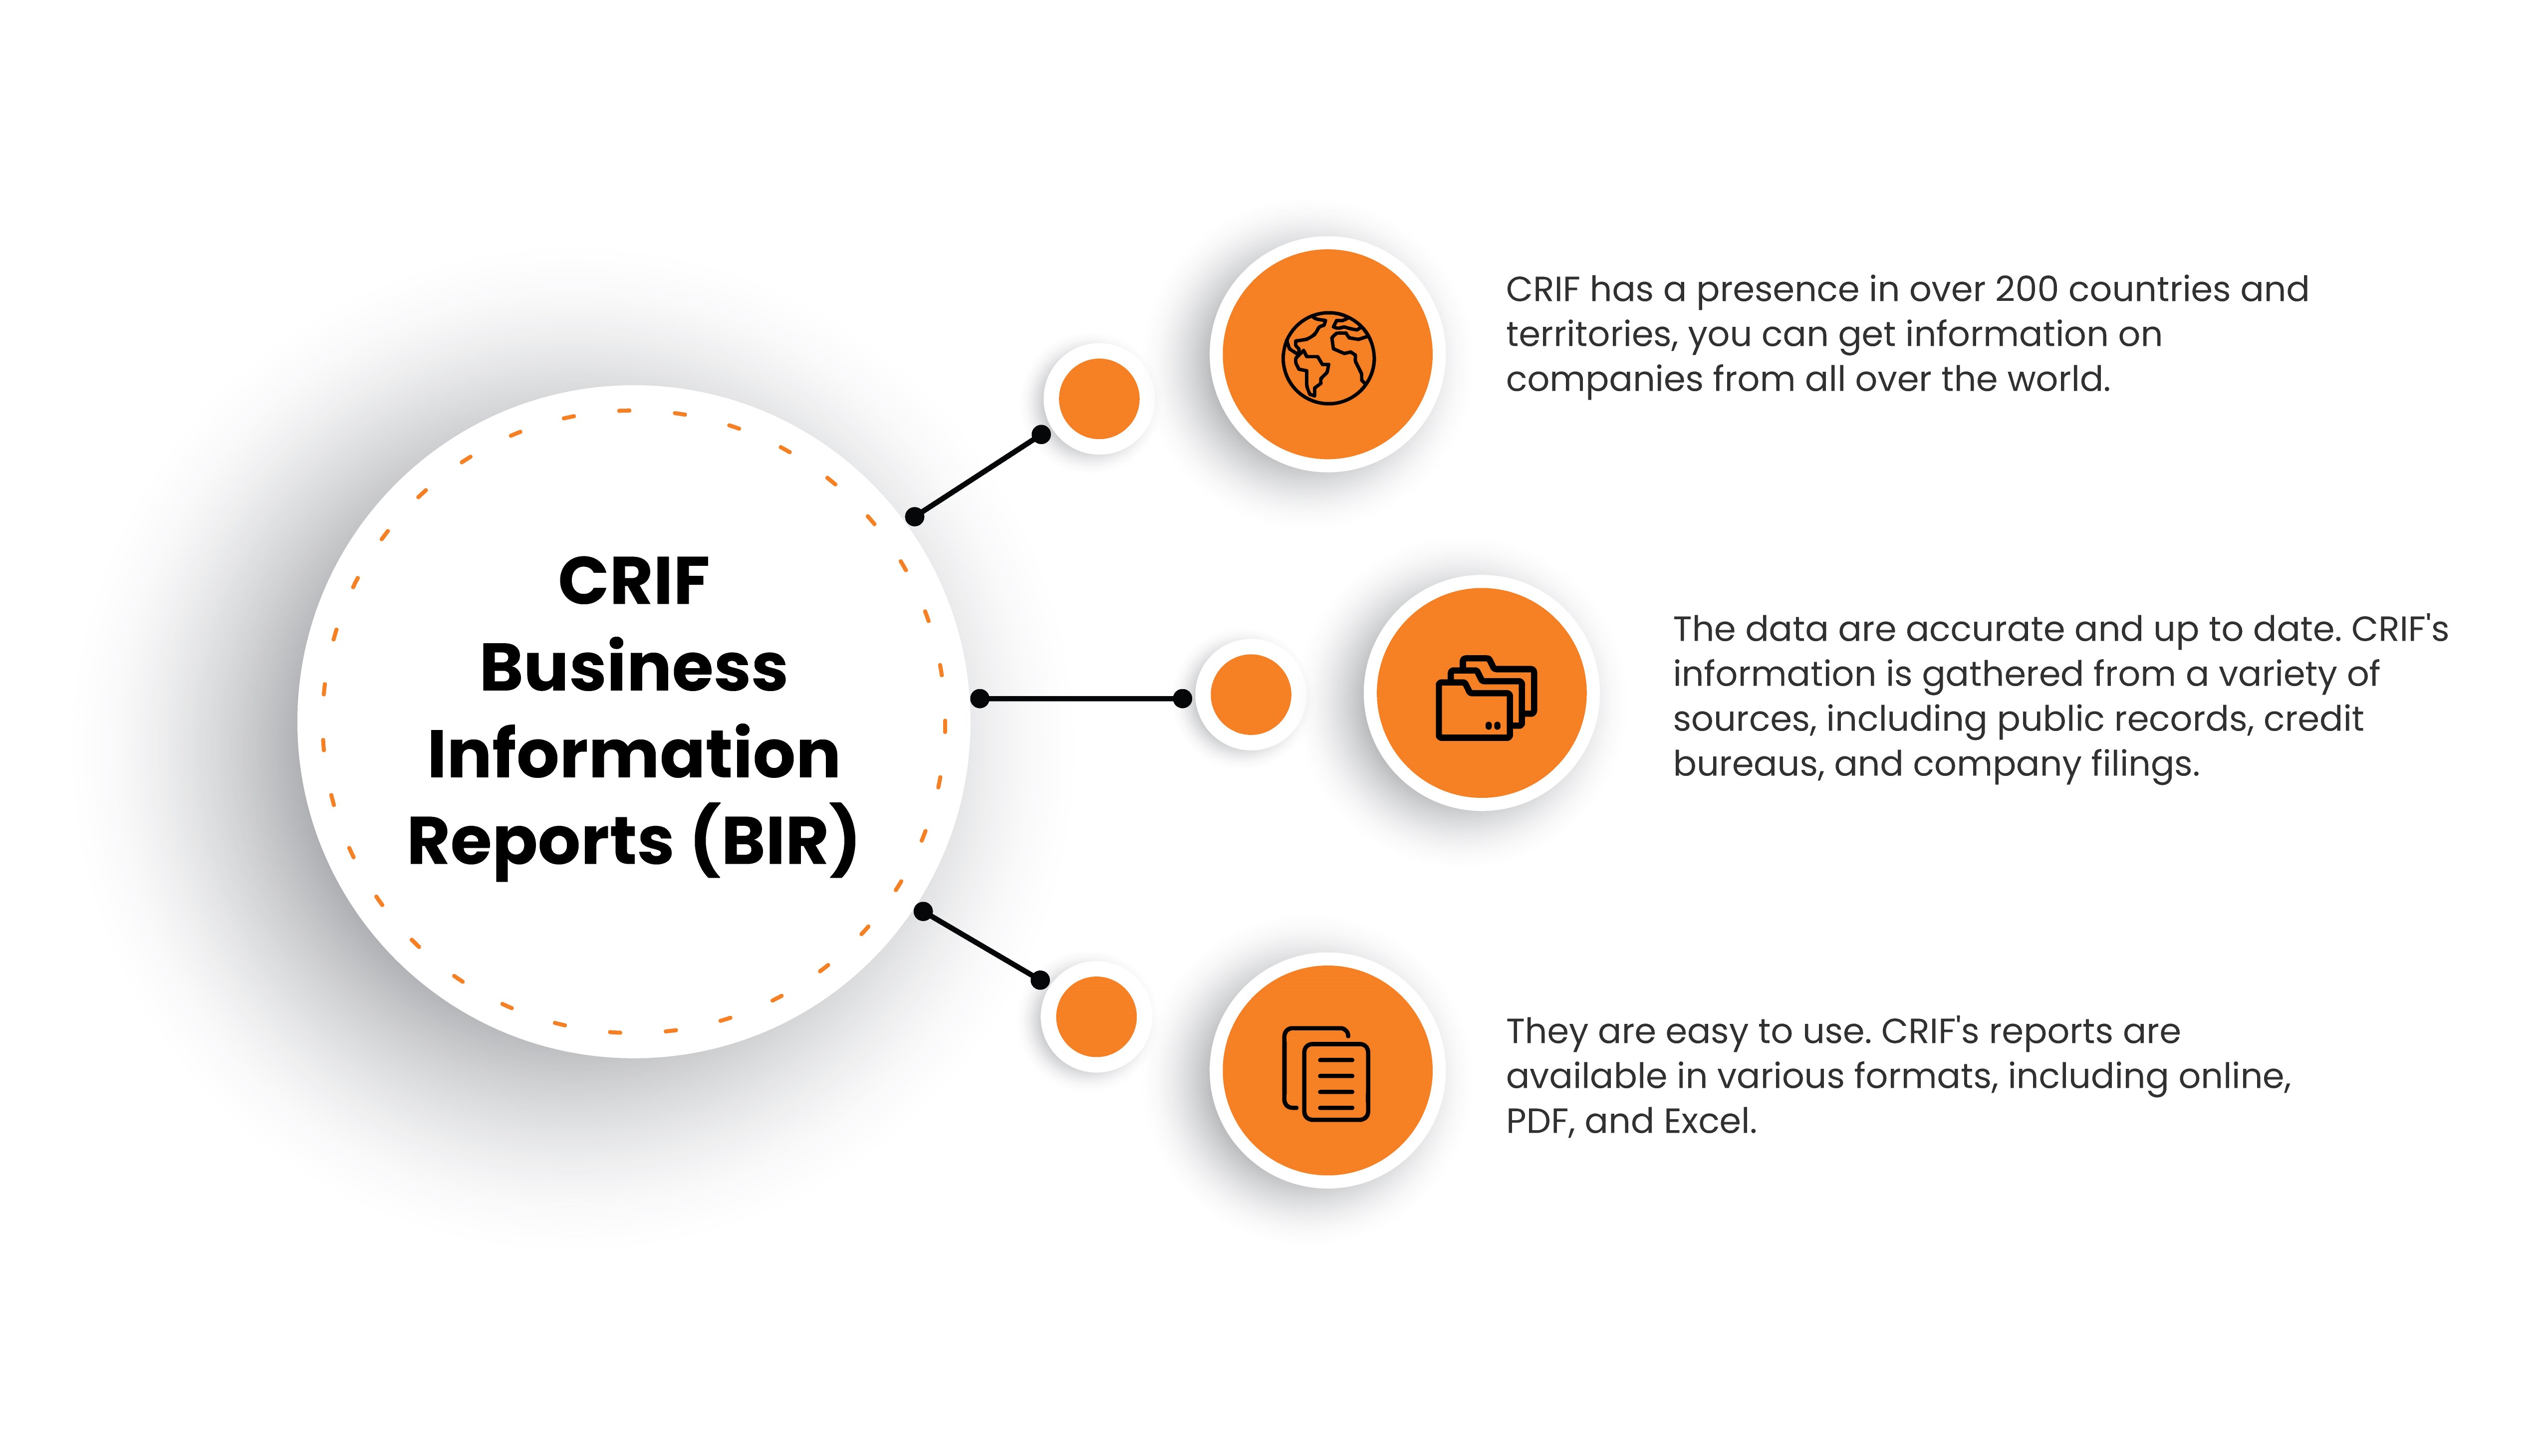 Benefits of CRIF’s Business Information Report